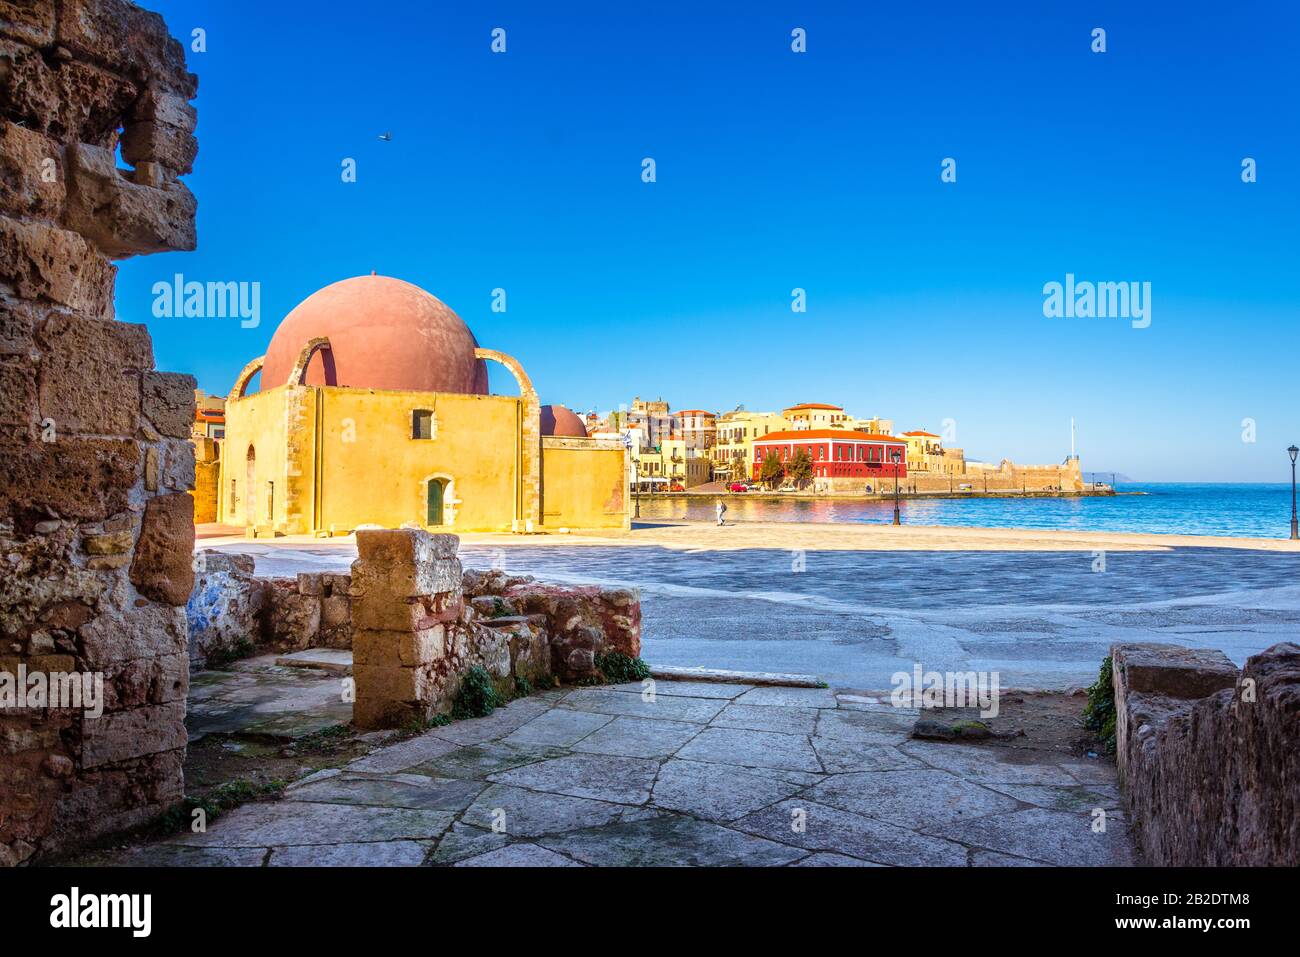 The beautiful old harbor of Chania with the amazing mosque, venetian shipyards, Crete, Greece. Stock Photo